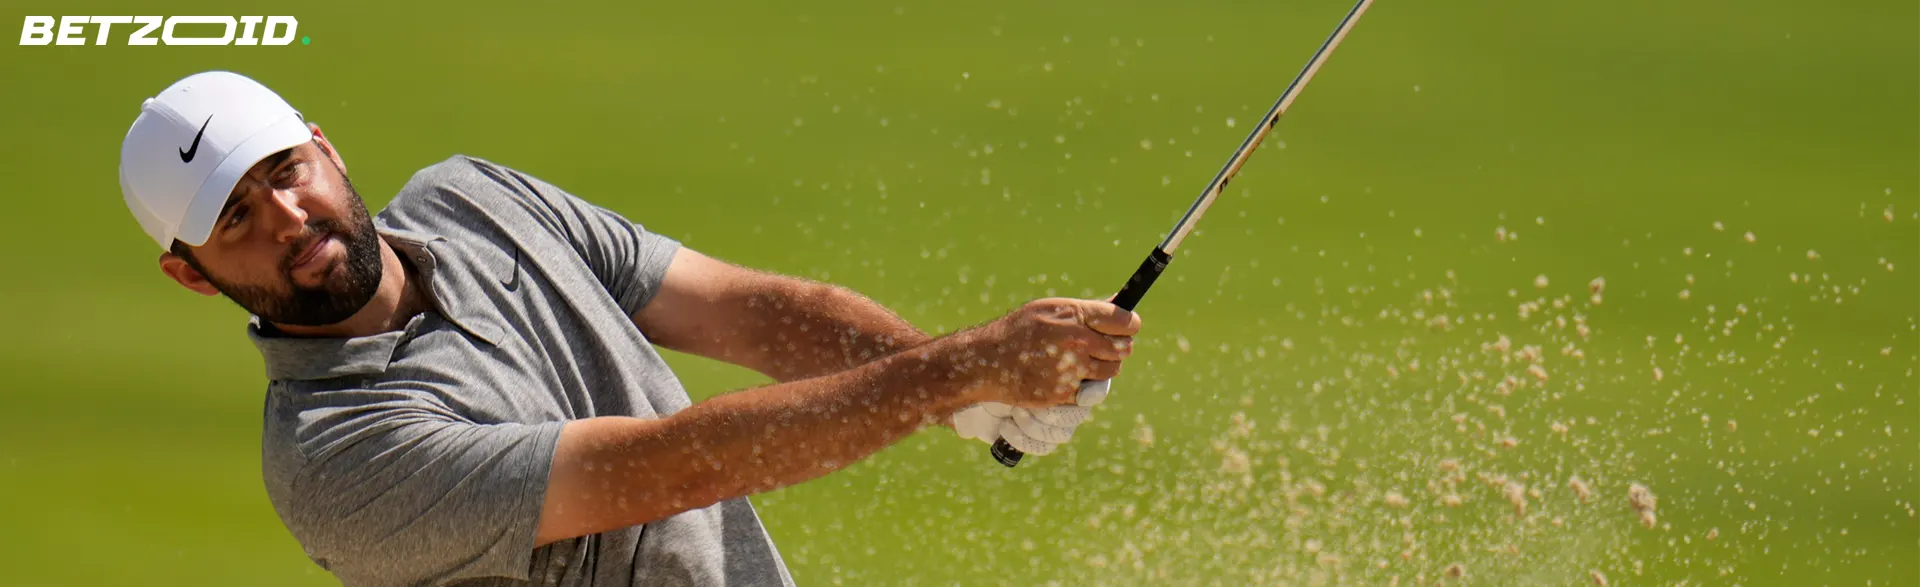 A golfer in mid-swing, representing the best betting sites in Quebec.